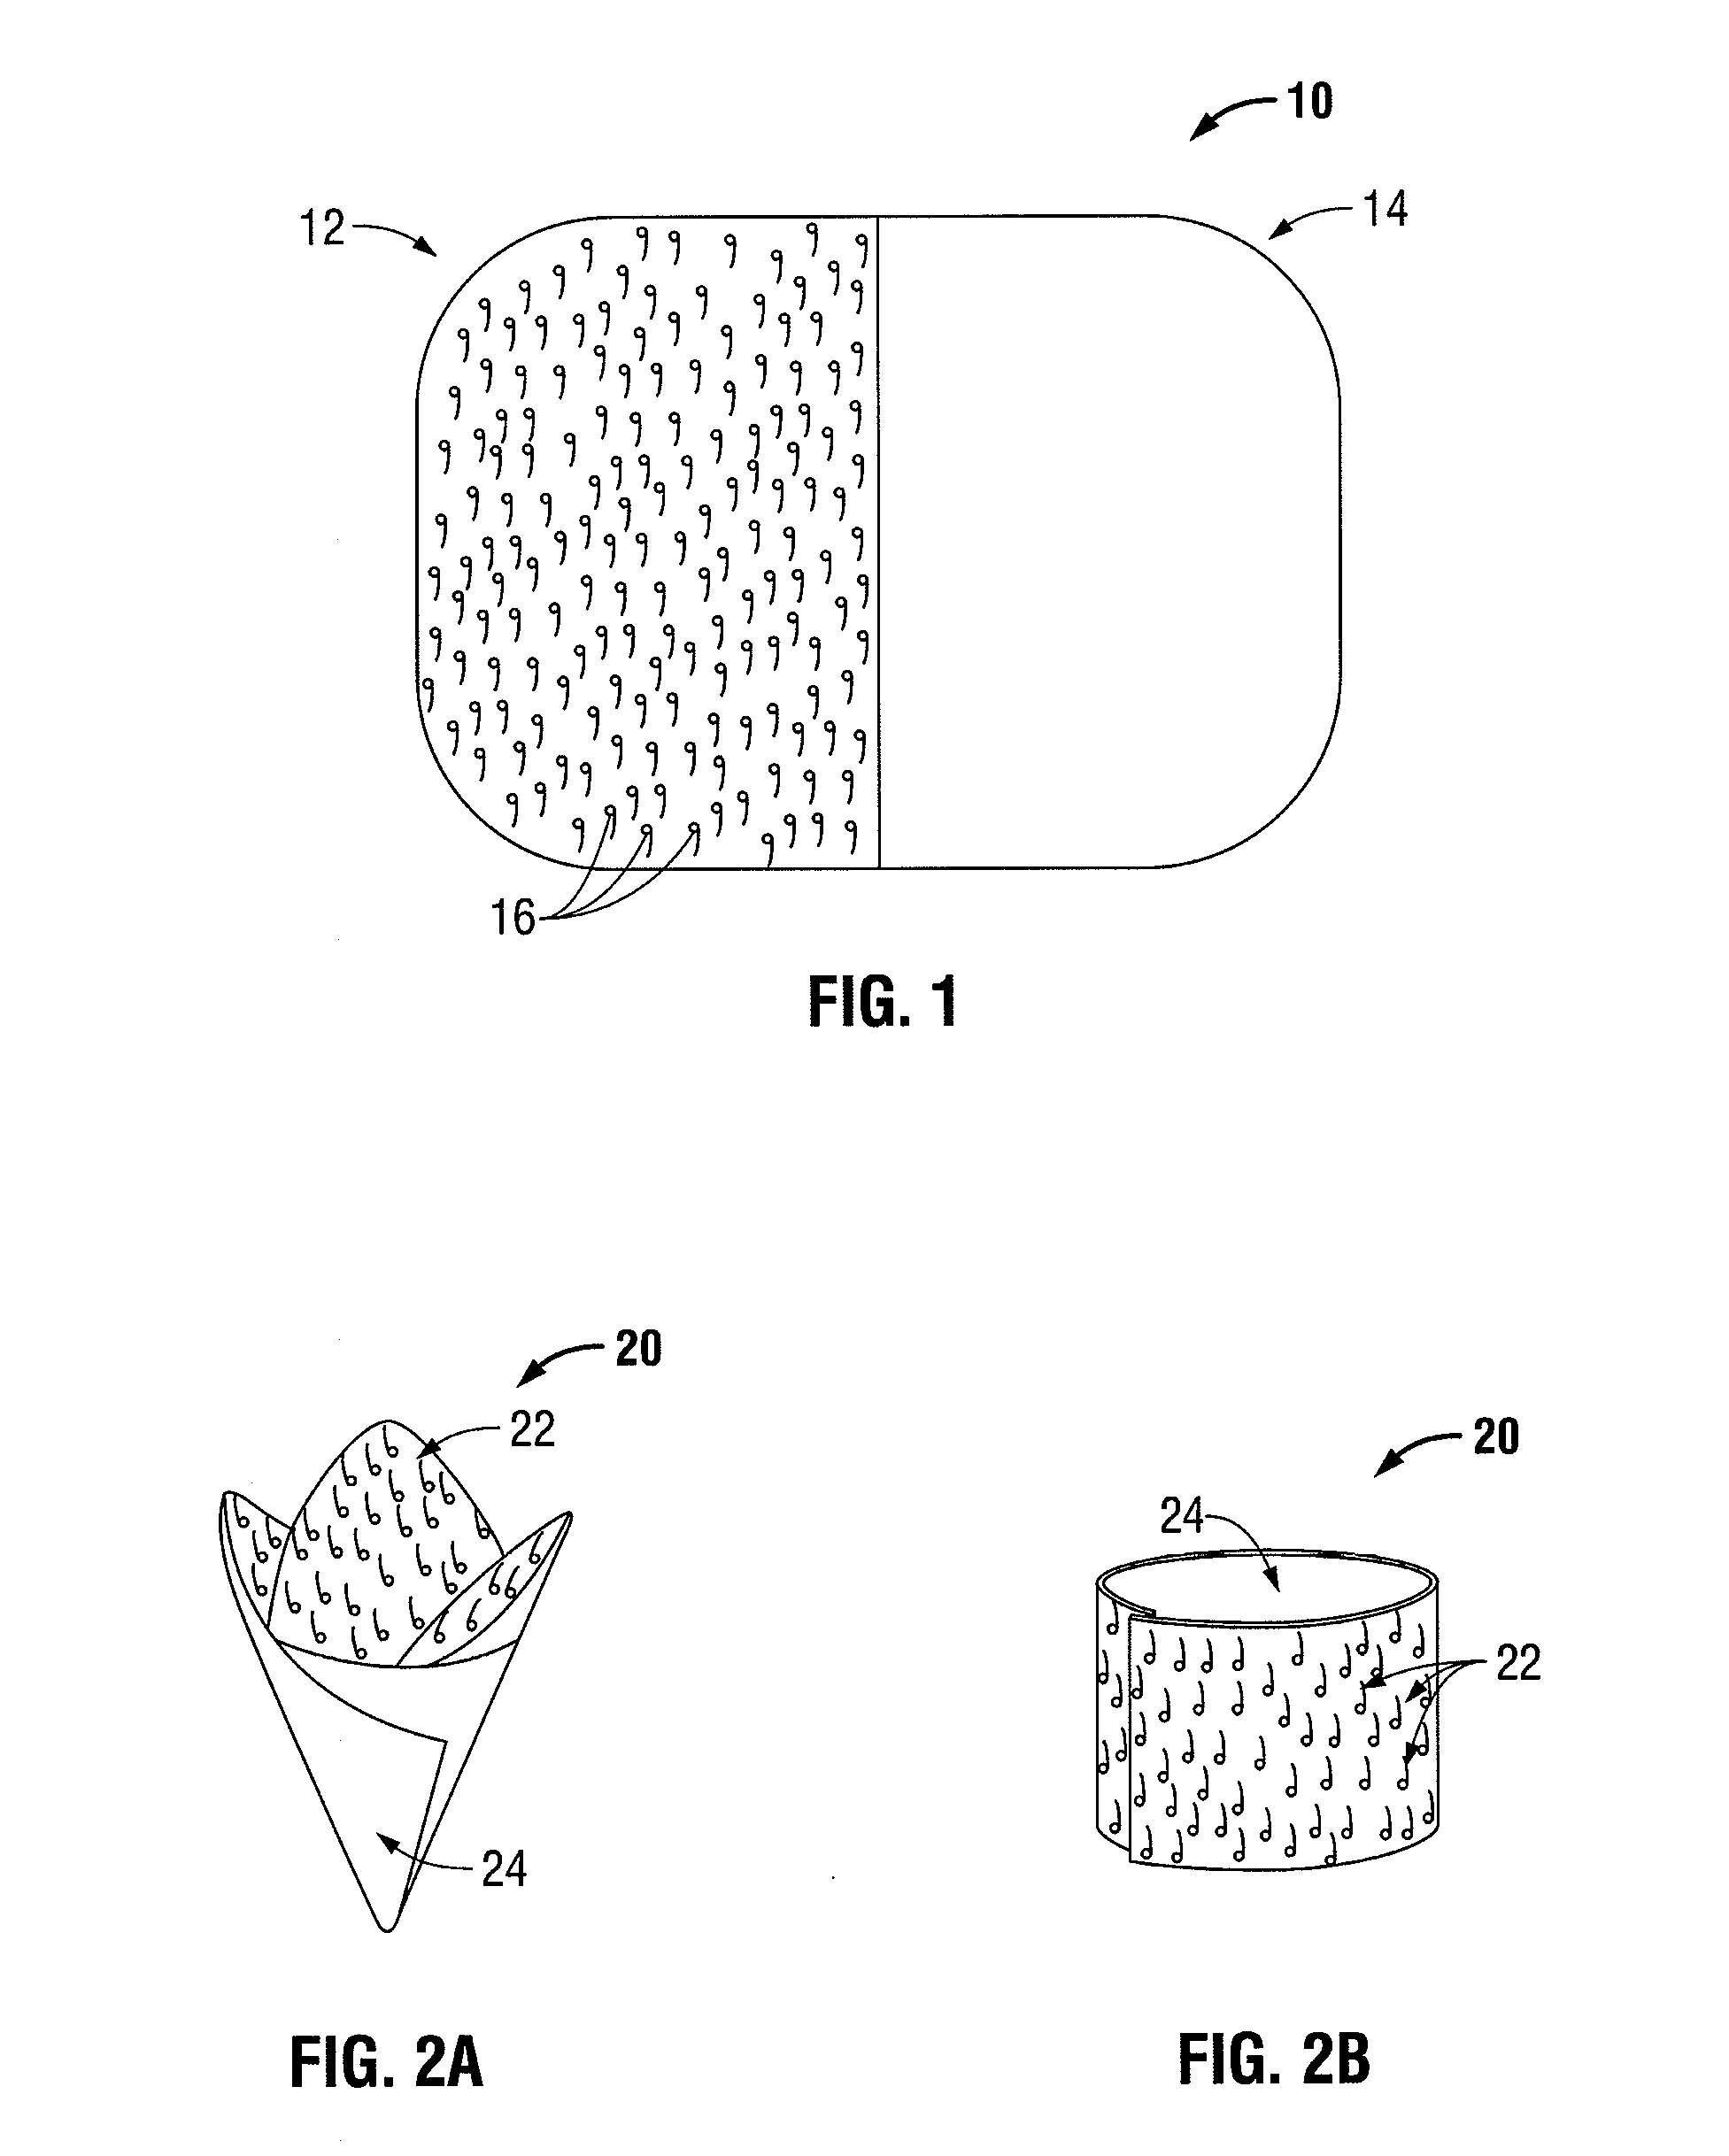 Three-dimensional surgical implant